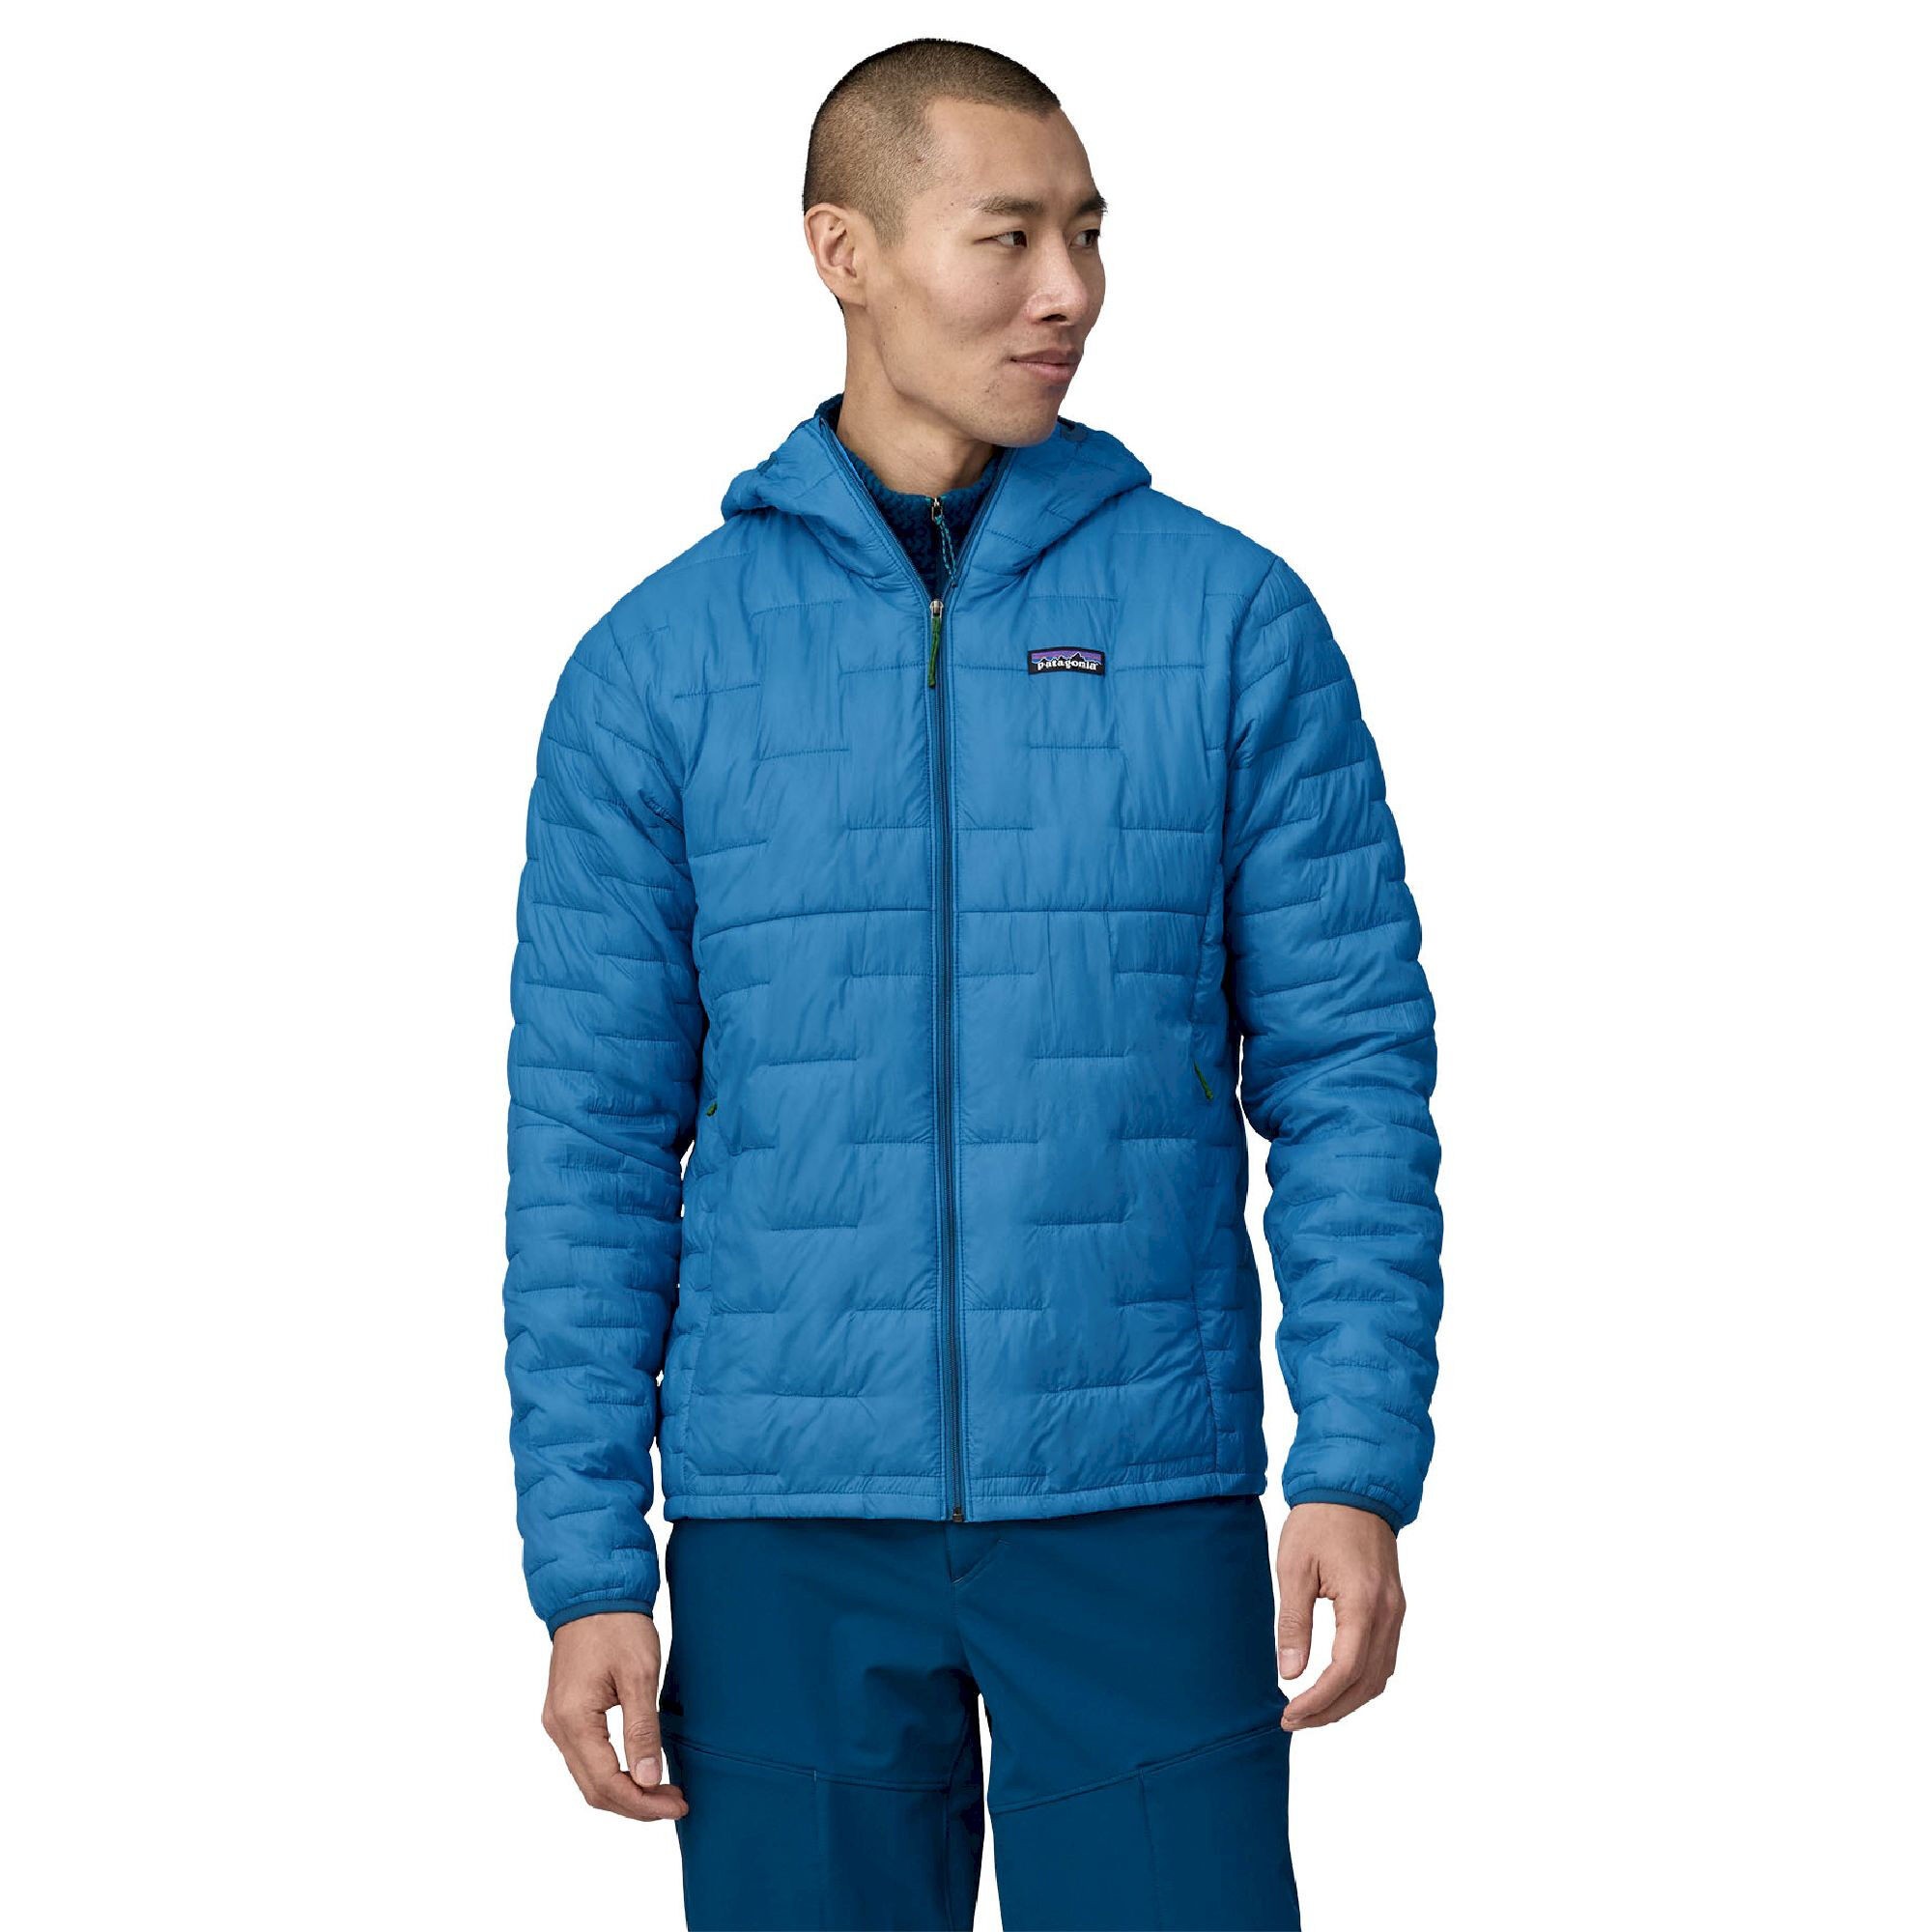 Patagonia Micro Puff Hoody - Synthetic jacket - Men's